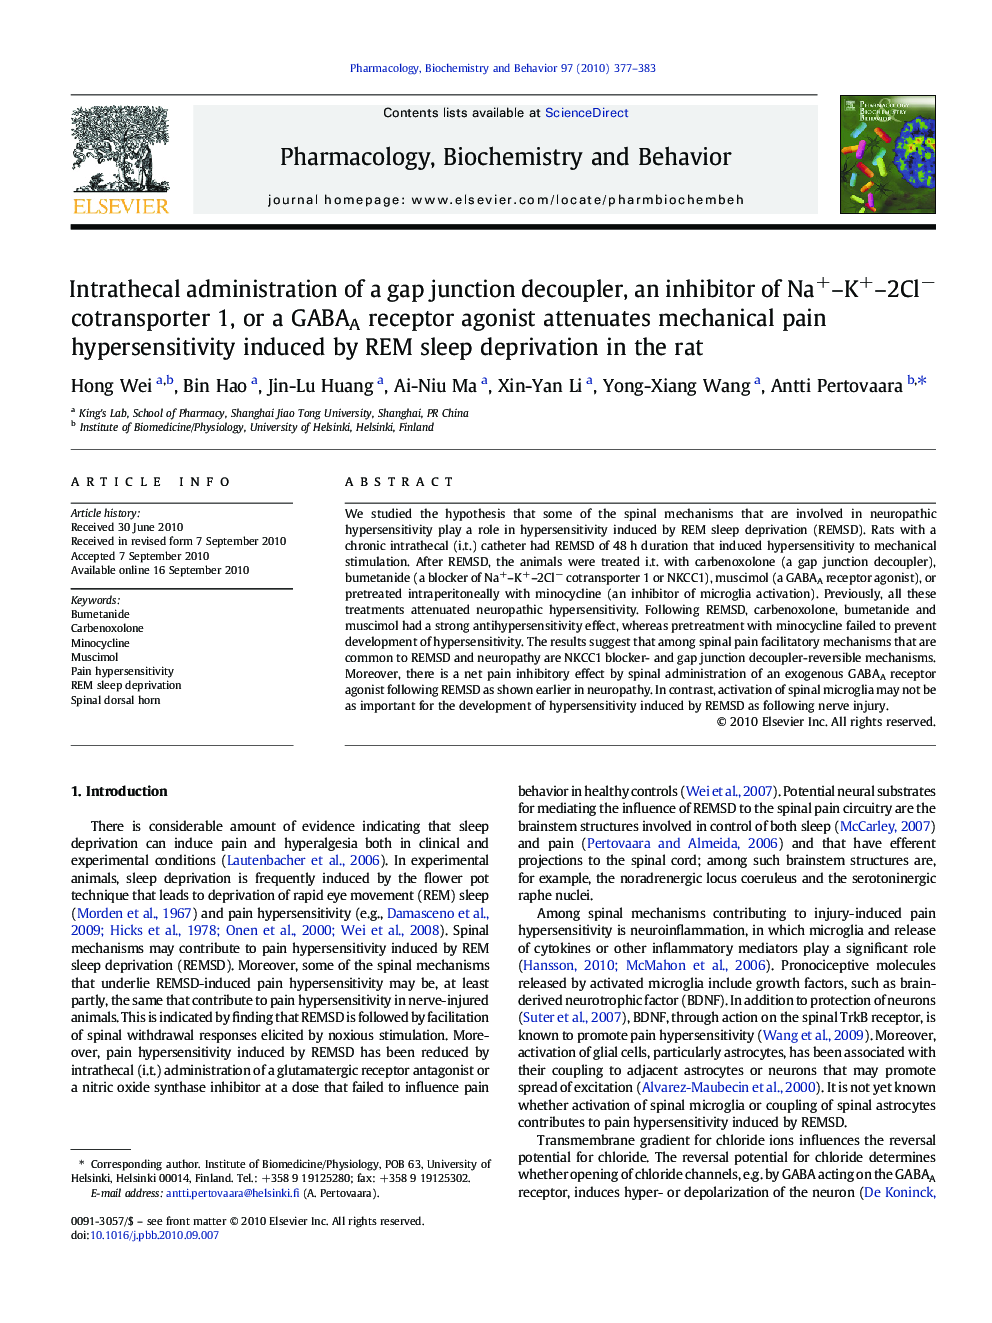 Intrathecal administration of a gap junction decoupler, an inhibitor of Na+–K+–2Cl− cotransporter 1, or a GABAA receptor agonist attenuates mechanical pain hypersensitivity induced by REM sleep deprivation in the rat